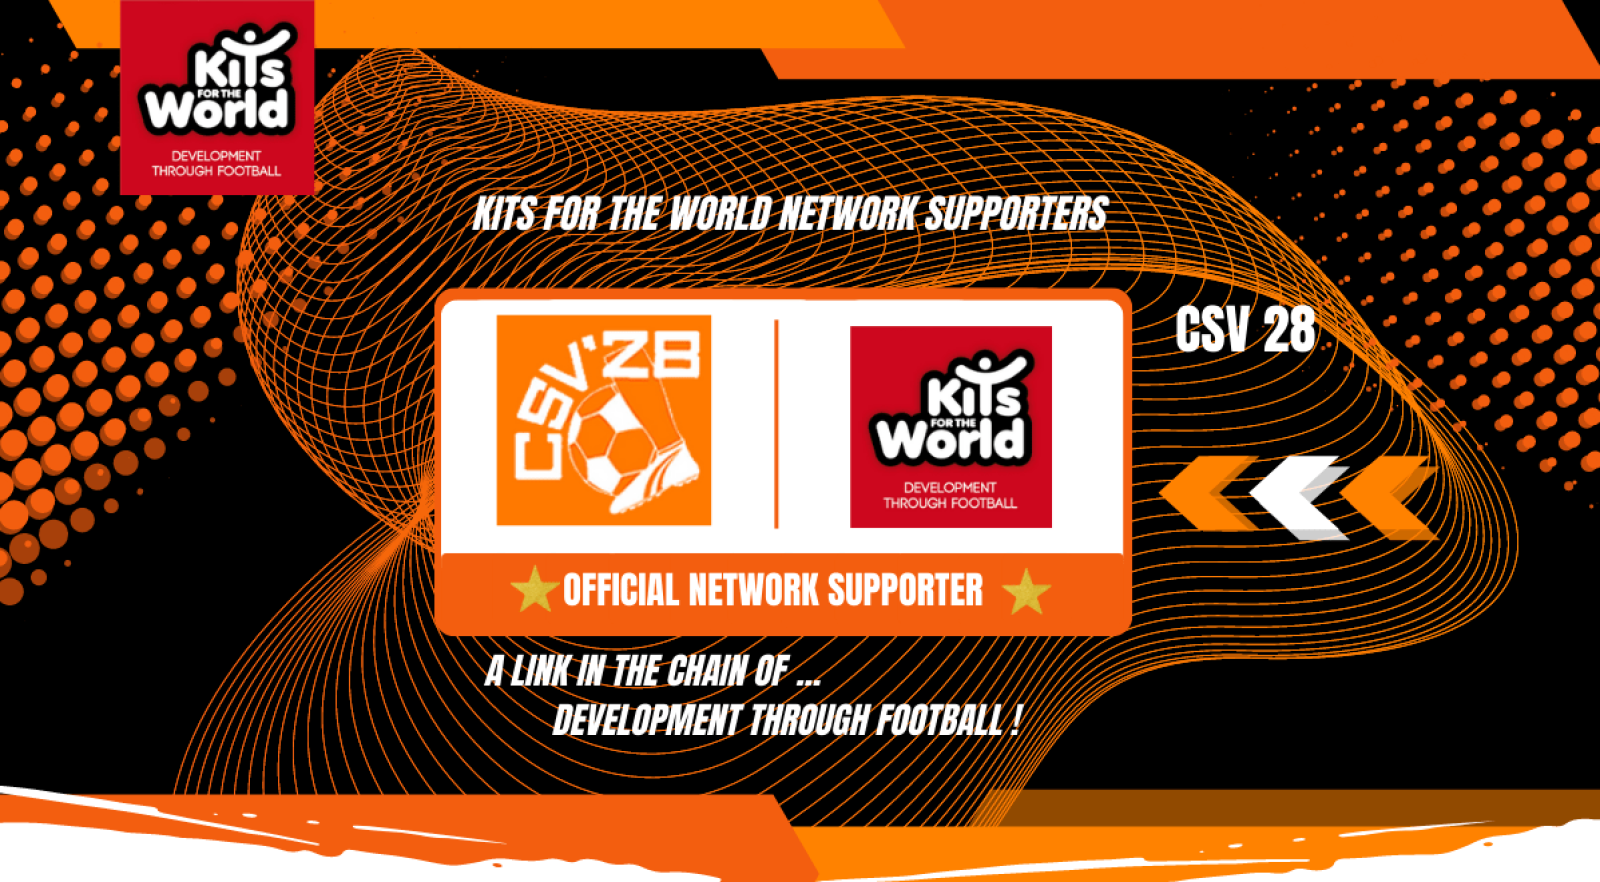 CSV 28 official NETWORK SUPPORTER for the World